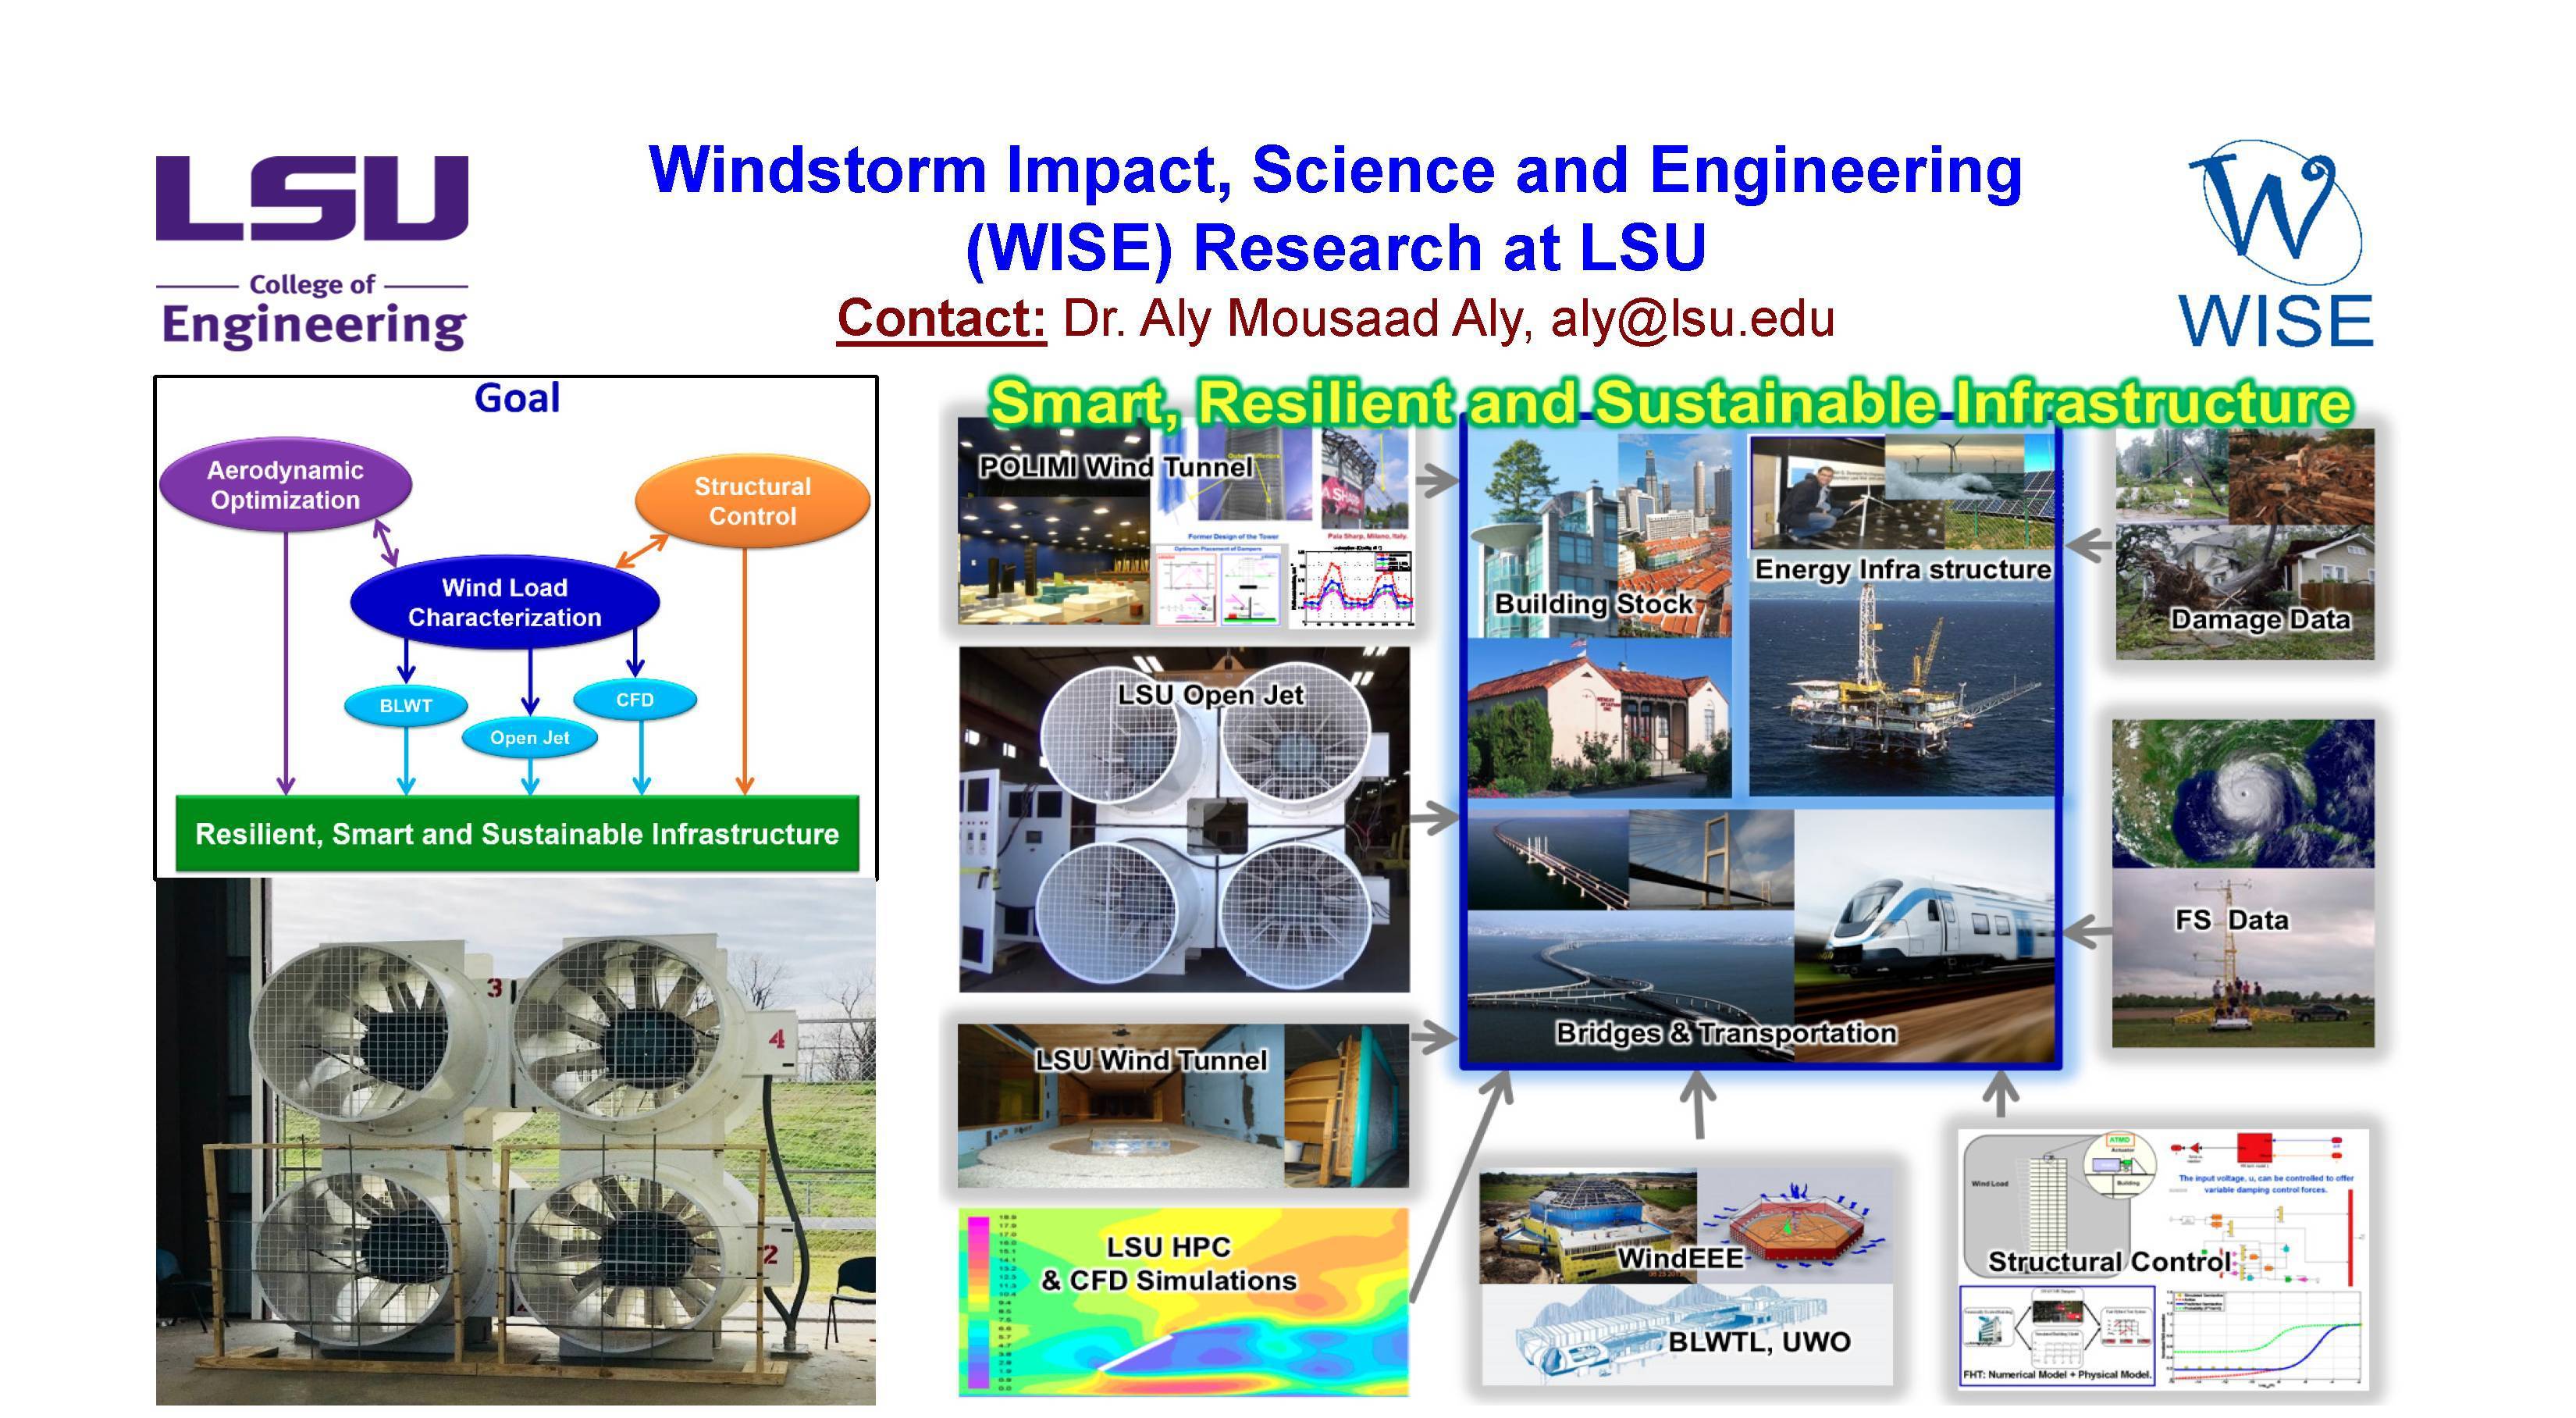 Research Overview: Our research aims at advancing knowledge and building the scientific basis in the areas of wind, structural and coastal engineering, to establish resilient, smart and recoverable infrastructure and businesses along the coast. 